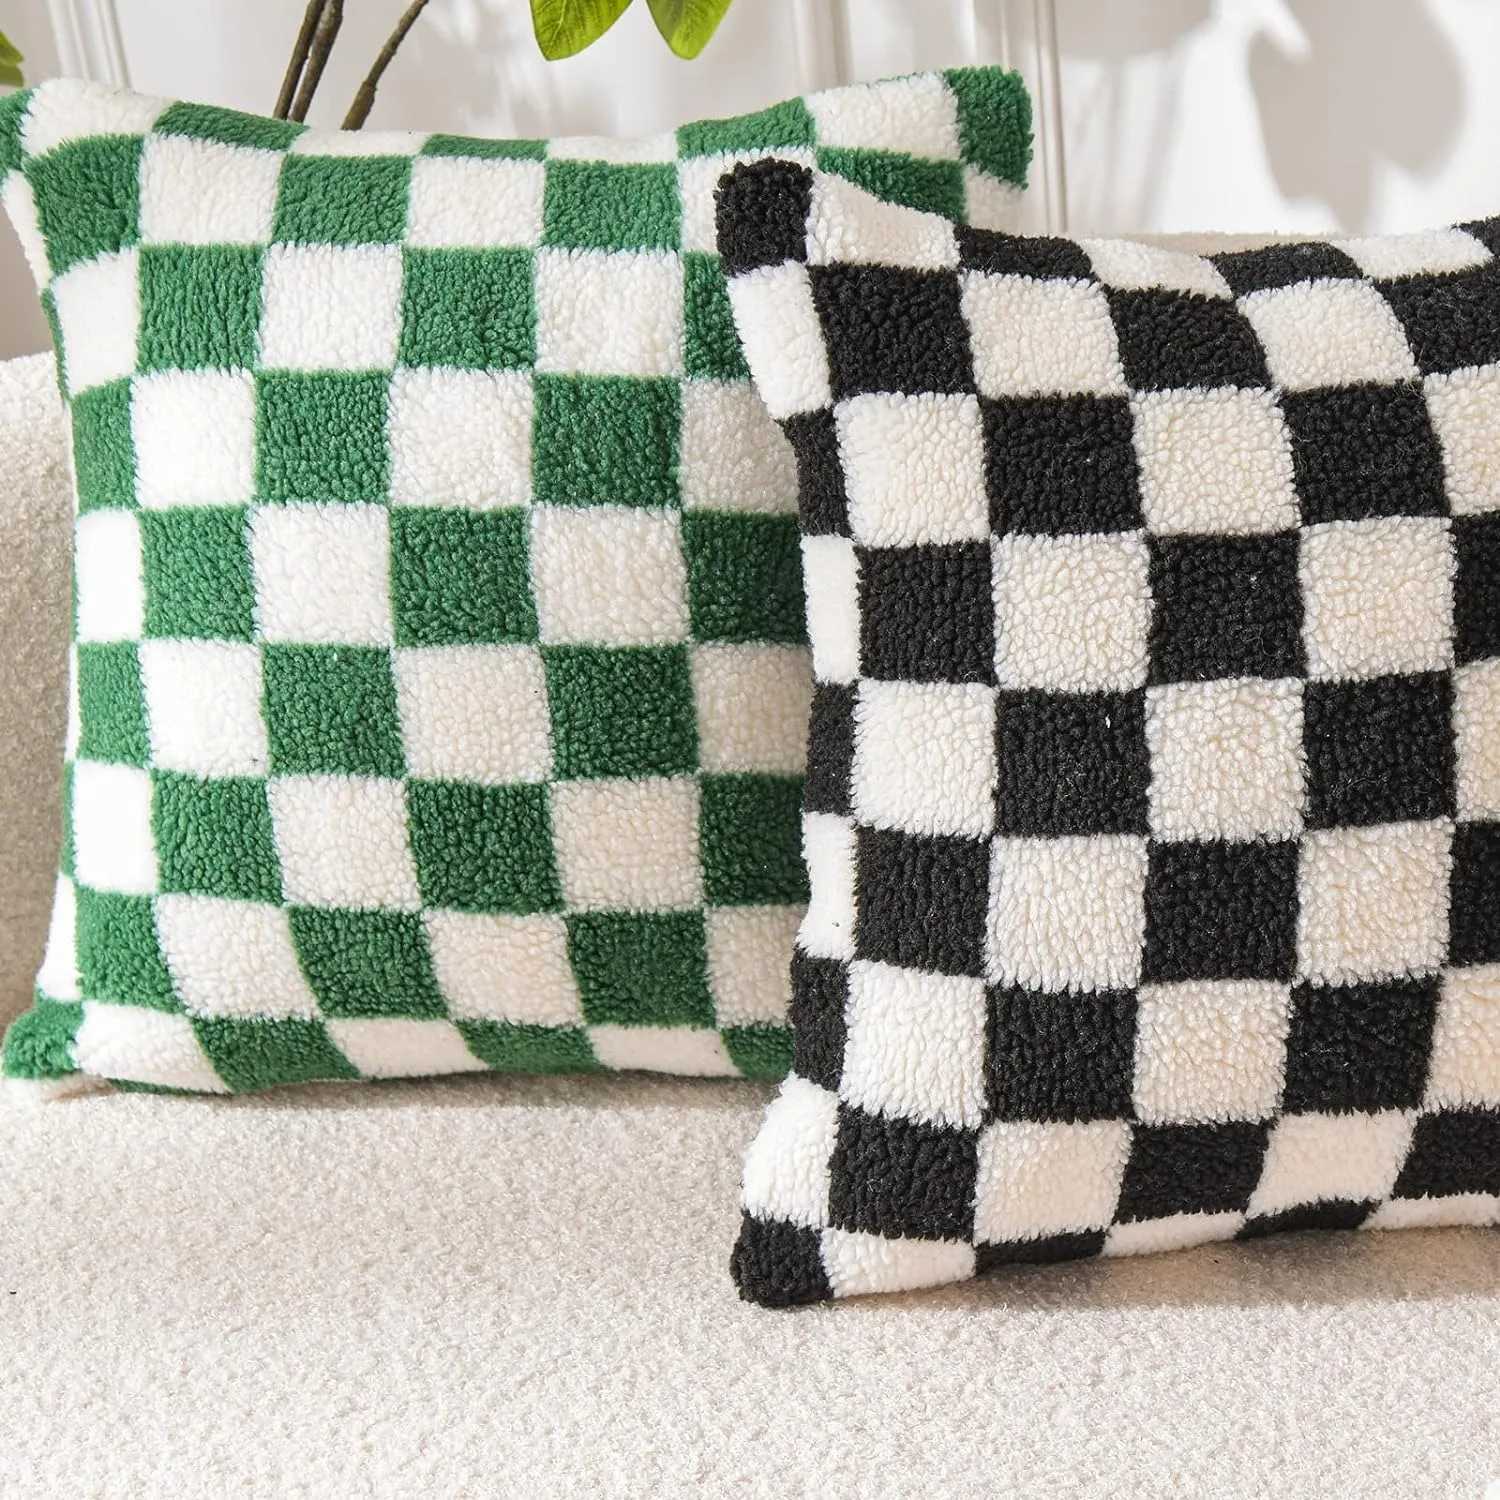 Cushion/Decorative Black Faux Fur Wool Throw Cover Checked Cushion Cover for Sofa Couch Living Room Polyester Lumbar Home Decoration